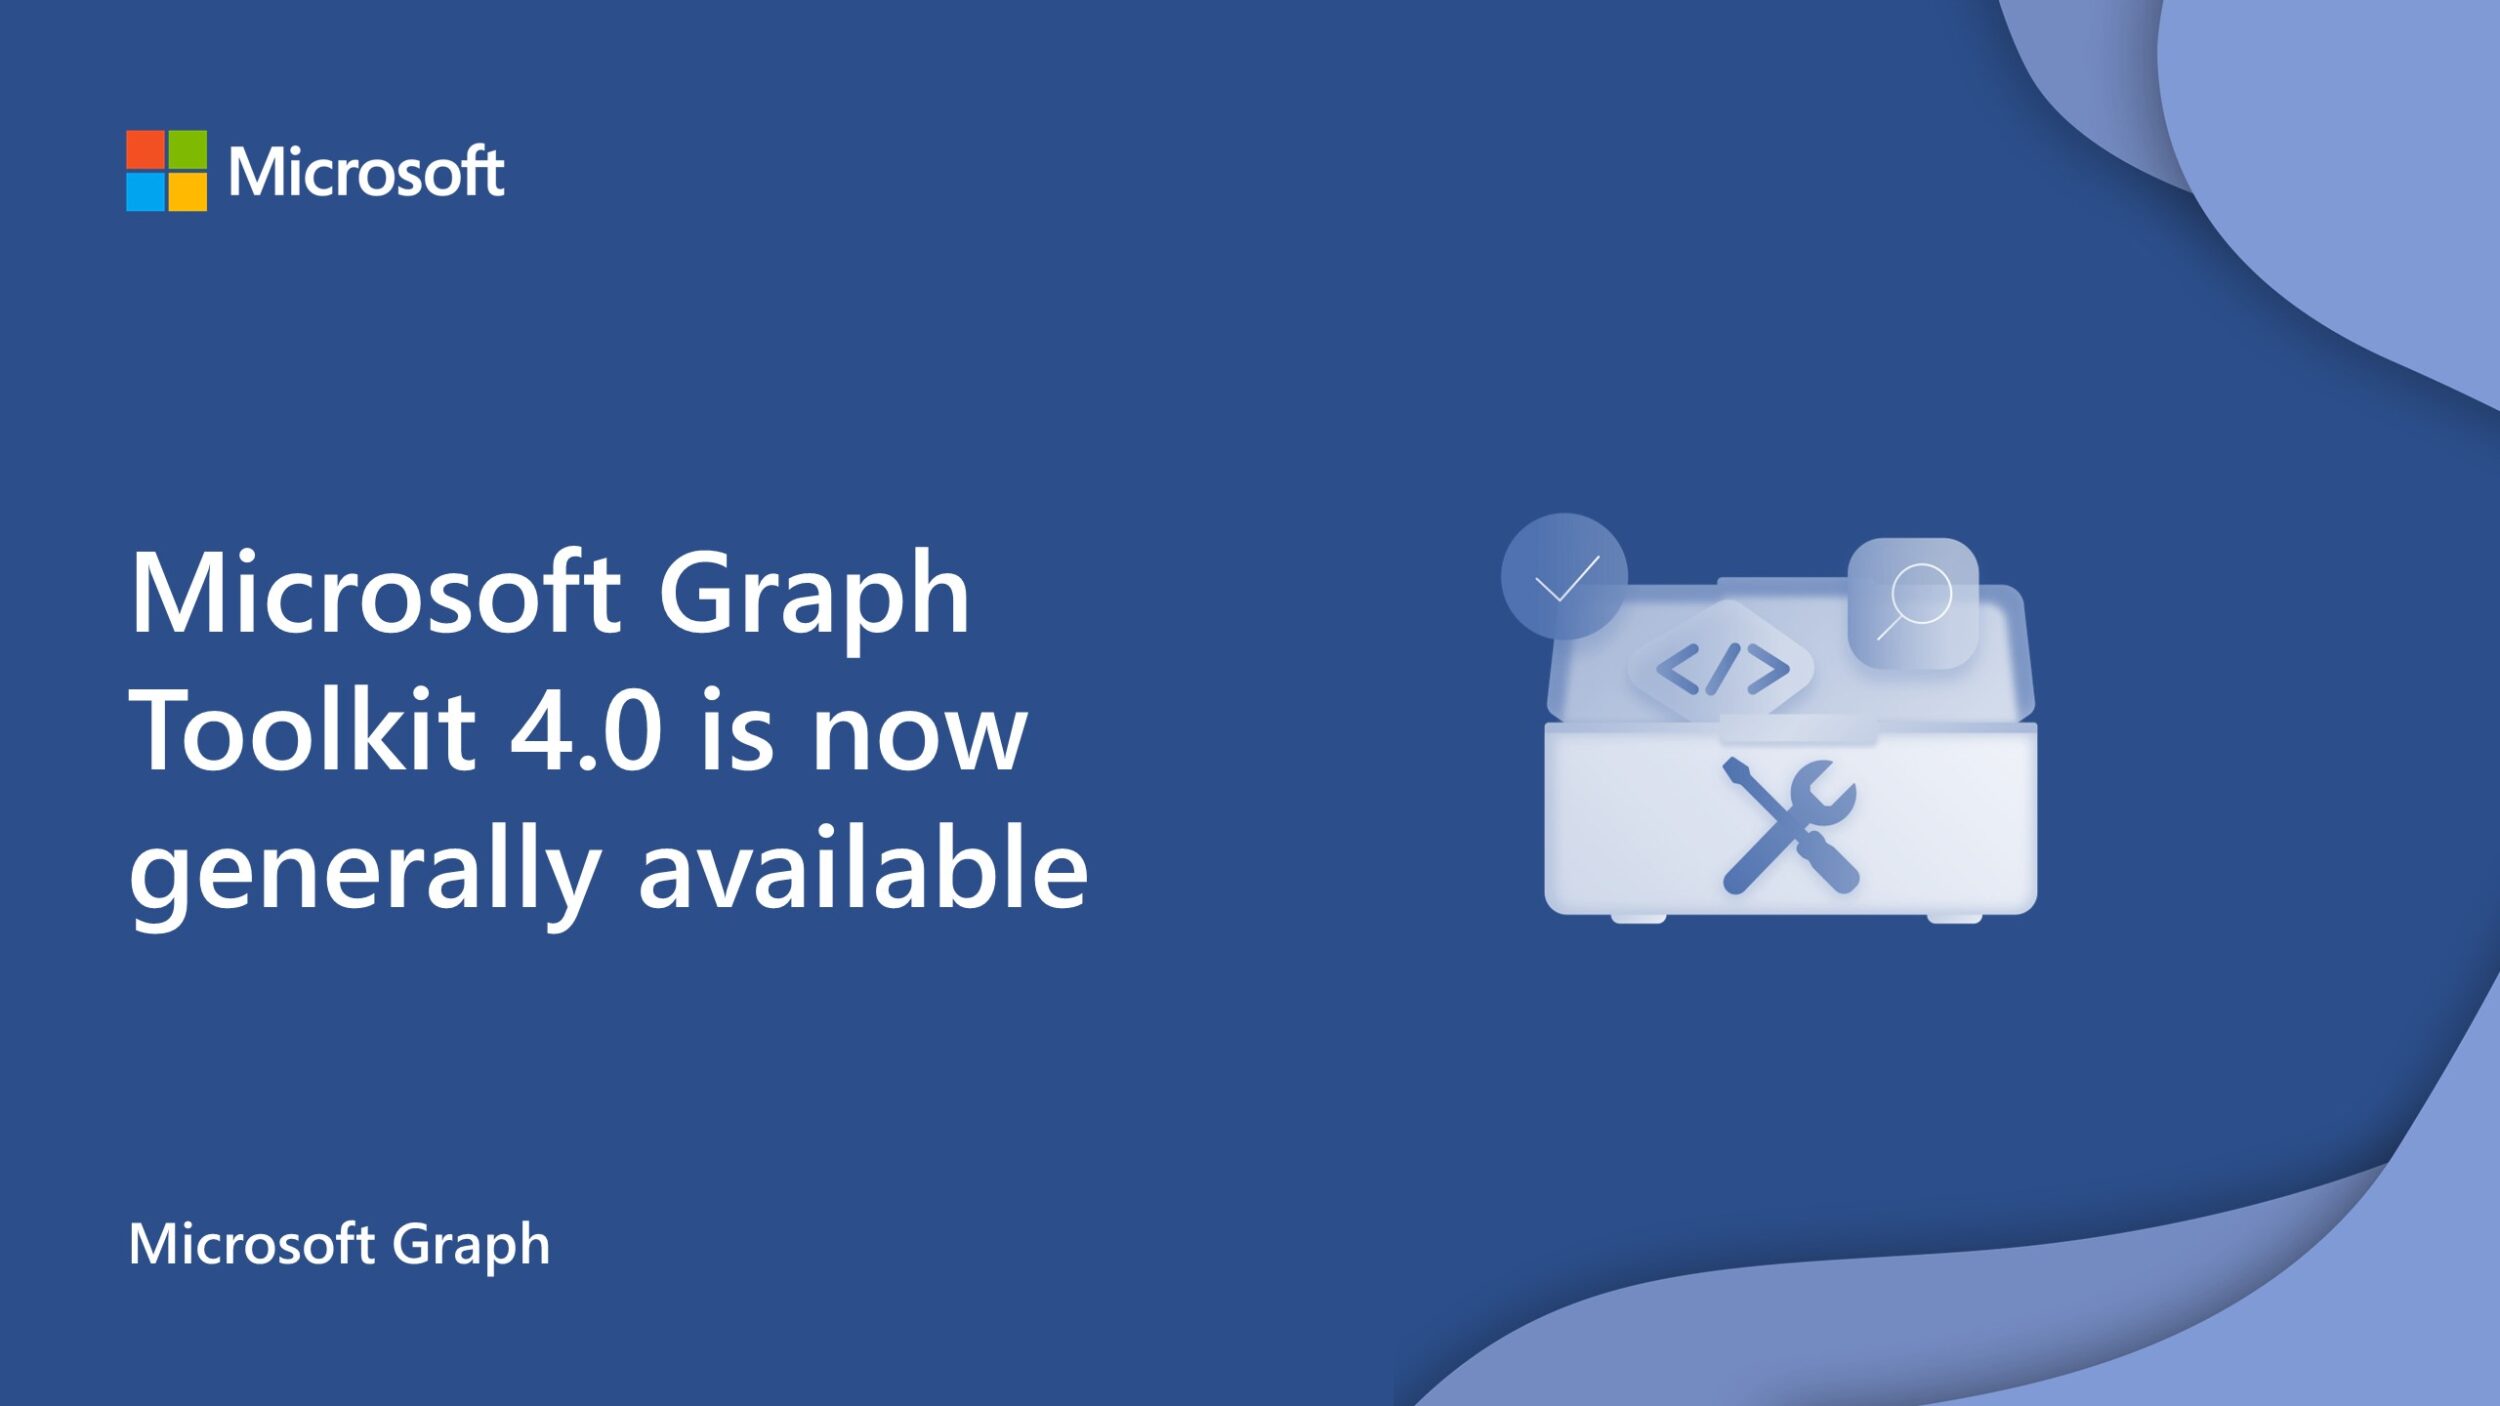 Microsoft Graph Toolkit v4.0 is now generally available